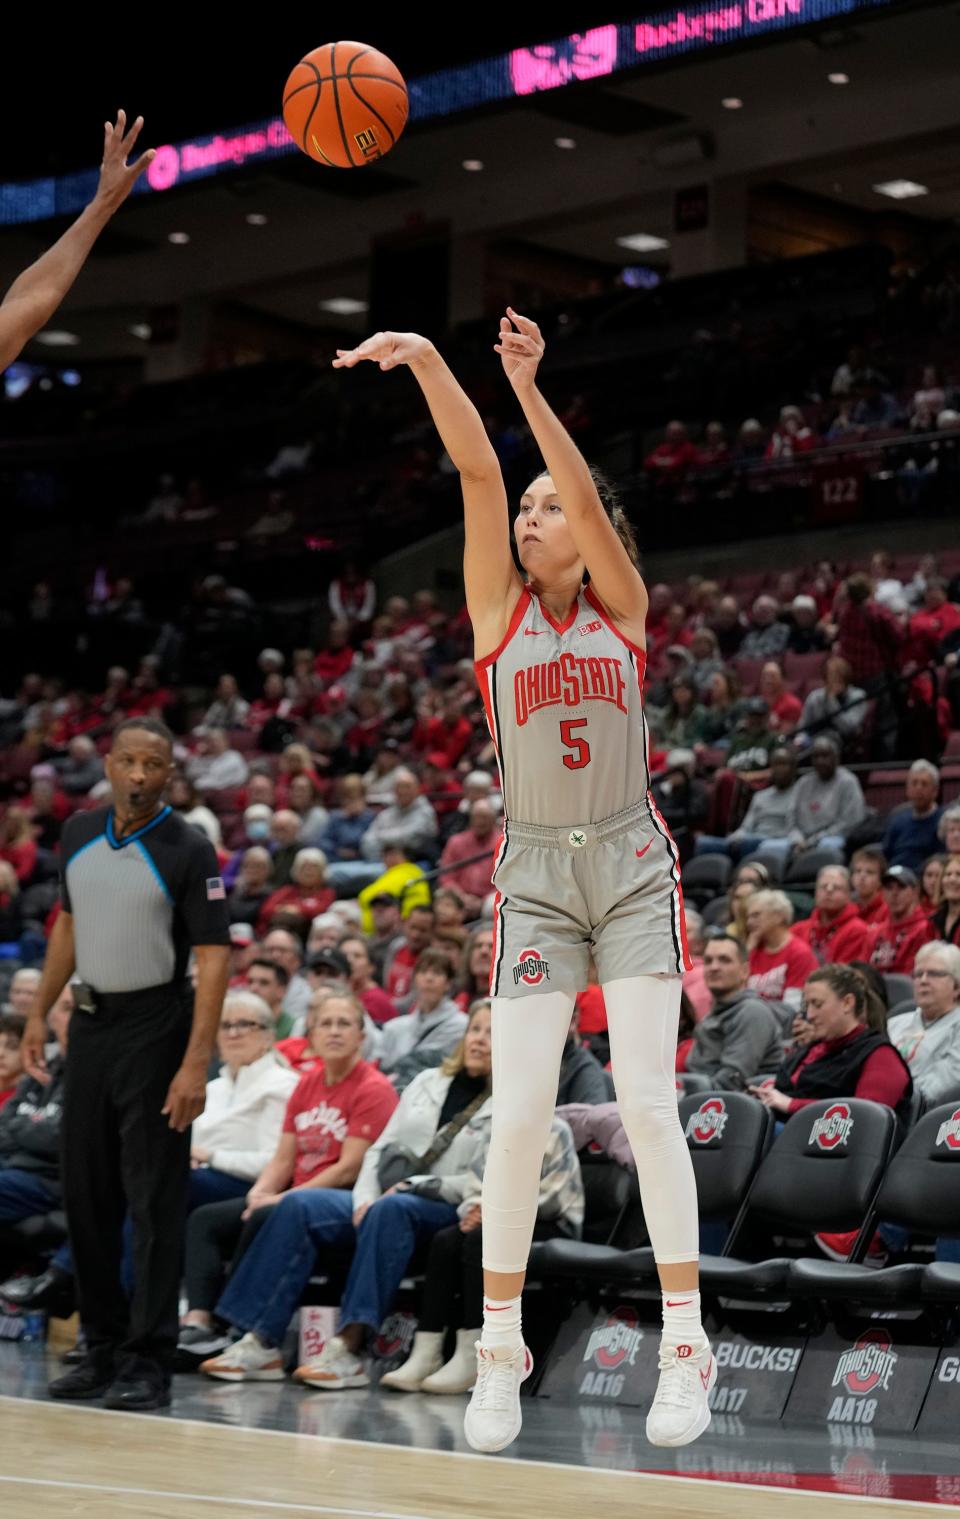 Ohio State's Emma Shumate scored a career-high 22 points on Tuesday.